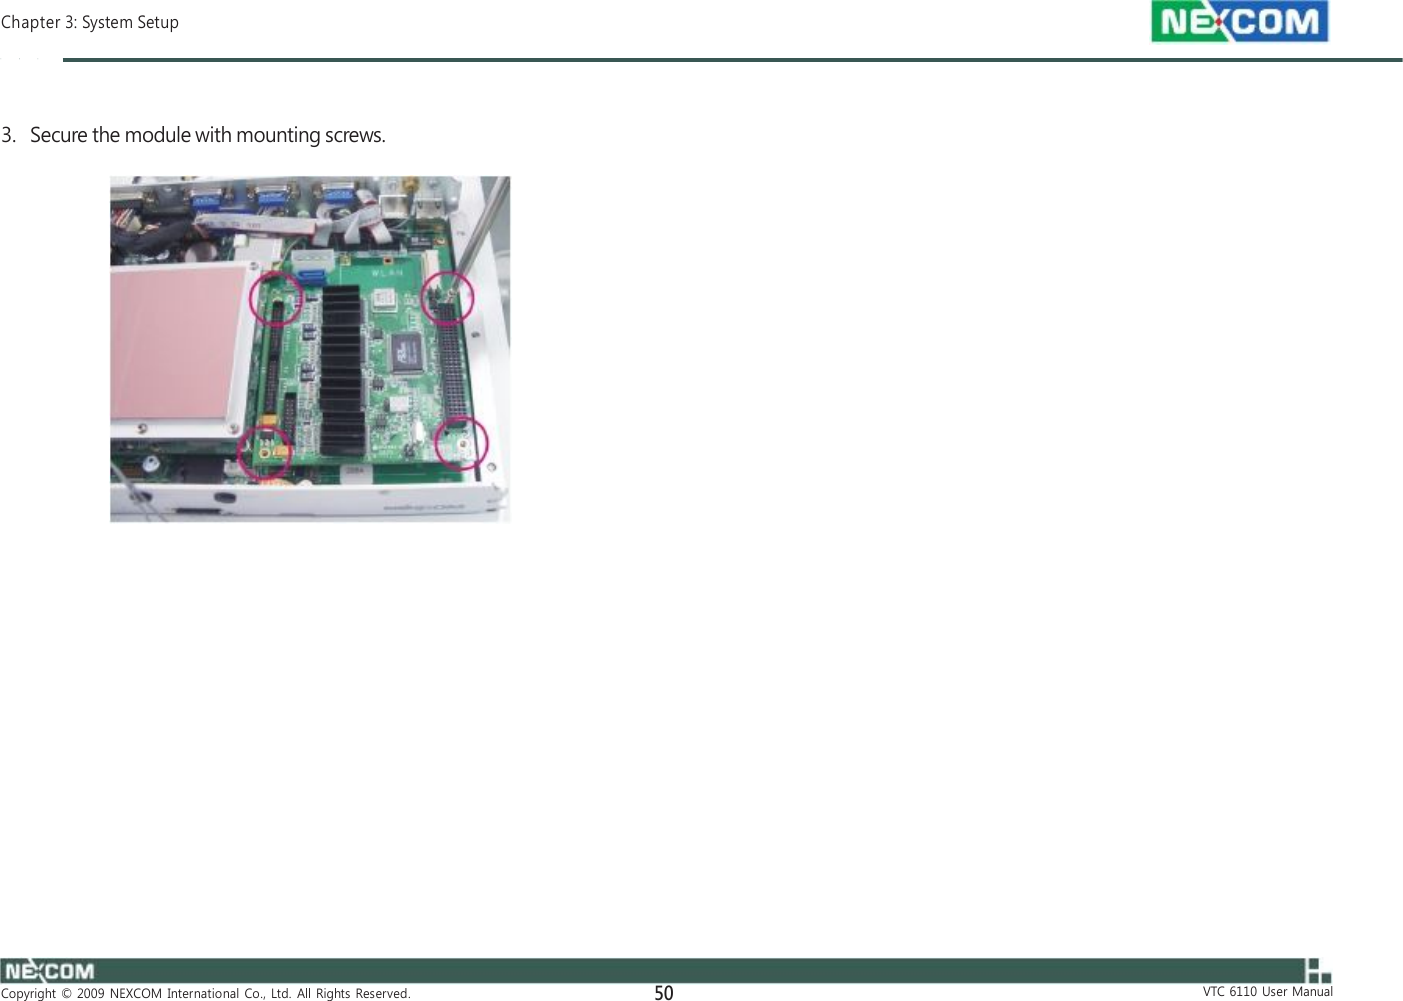  Chapter 3: System Setup    3.   Secure the module with mounting screws.                                  Copyright  ©  2009  NEXCOM  International  Co.,  Ltd.  All  Rights  Reserved. 50                                  VTC  6110  User  Manual 